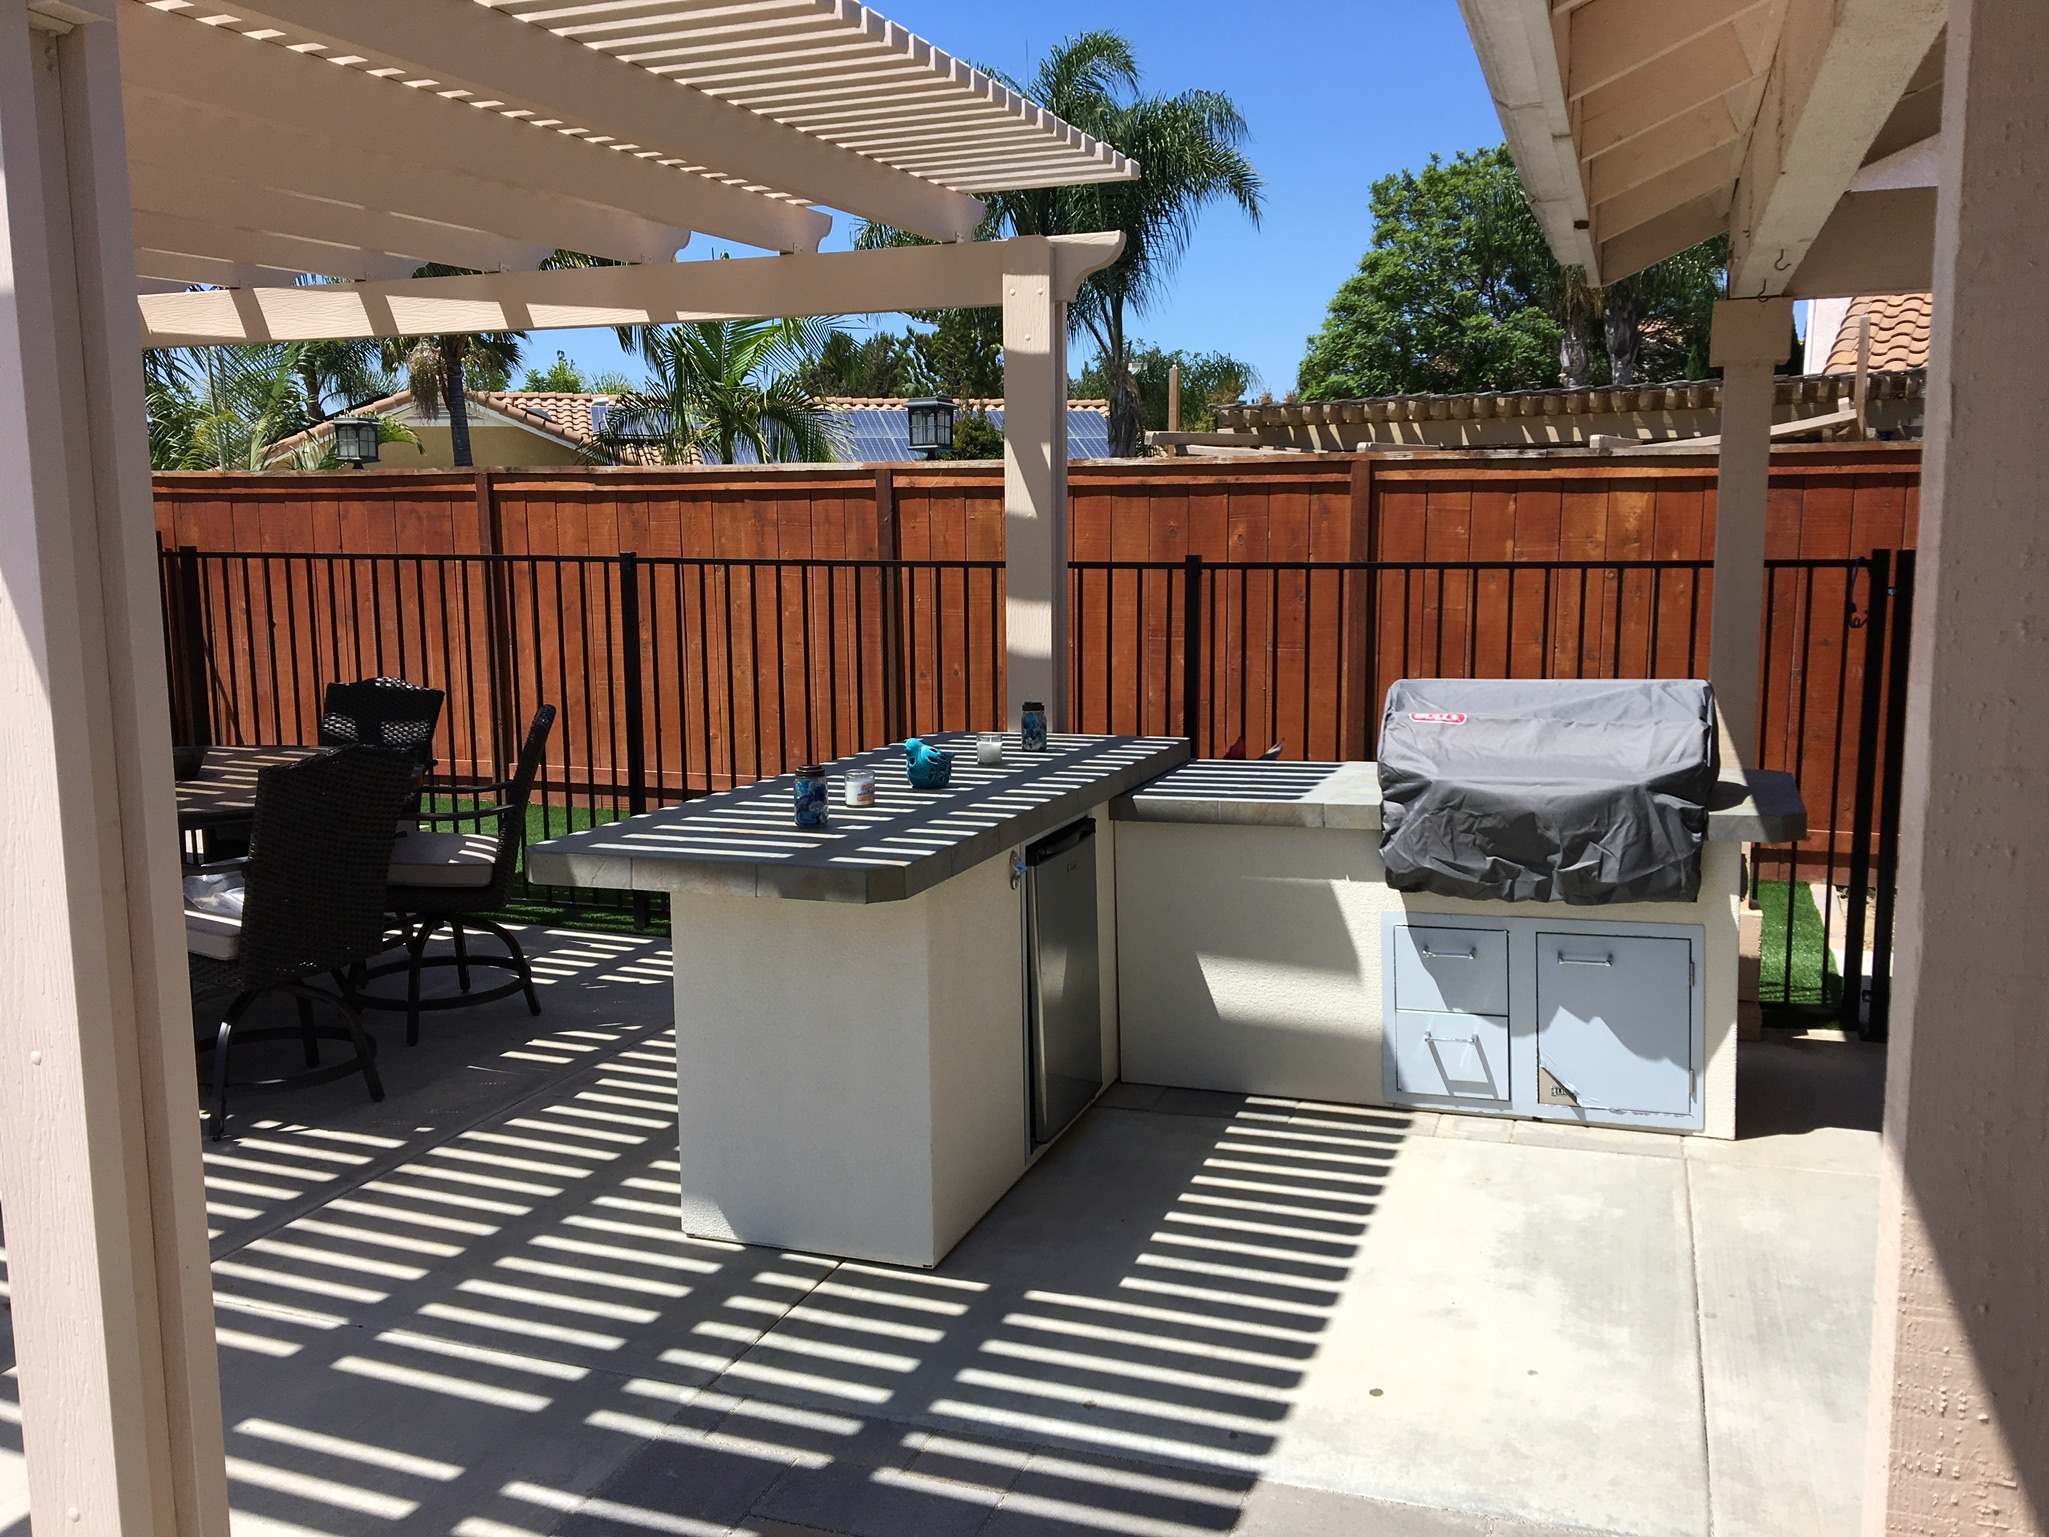 Patio Cover with Outdoor BBQ - SO CAL CONTRACTORS & REMODELING, INC.